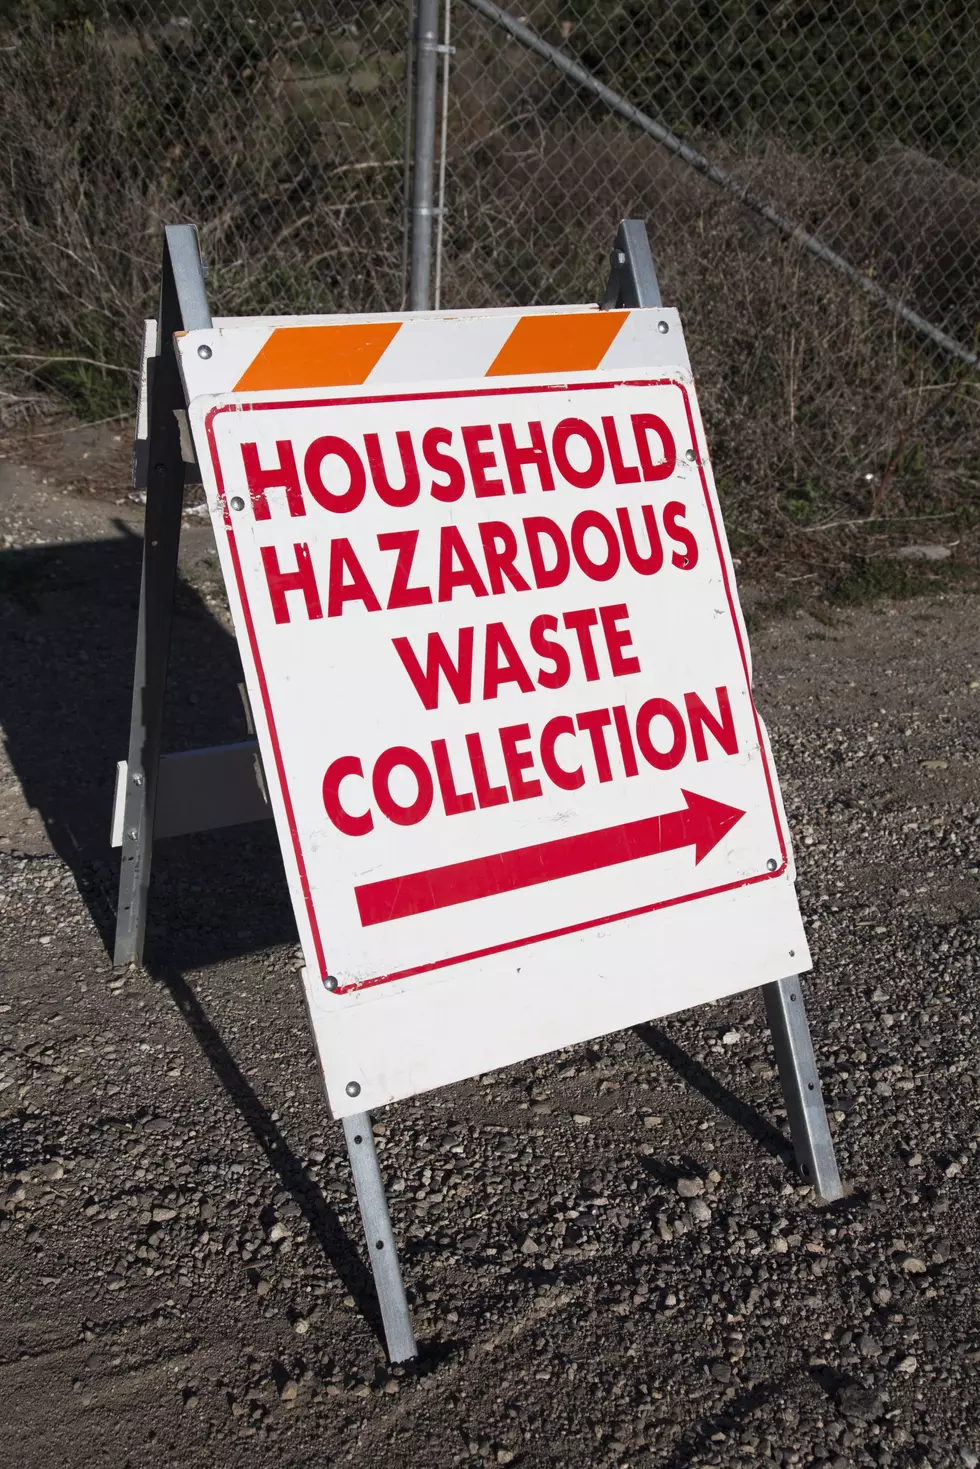 Free Household Hazardous Waste Collection Event for Grant County Citizens